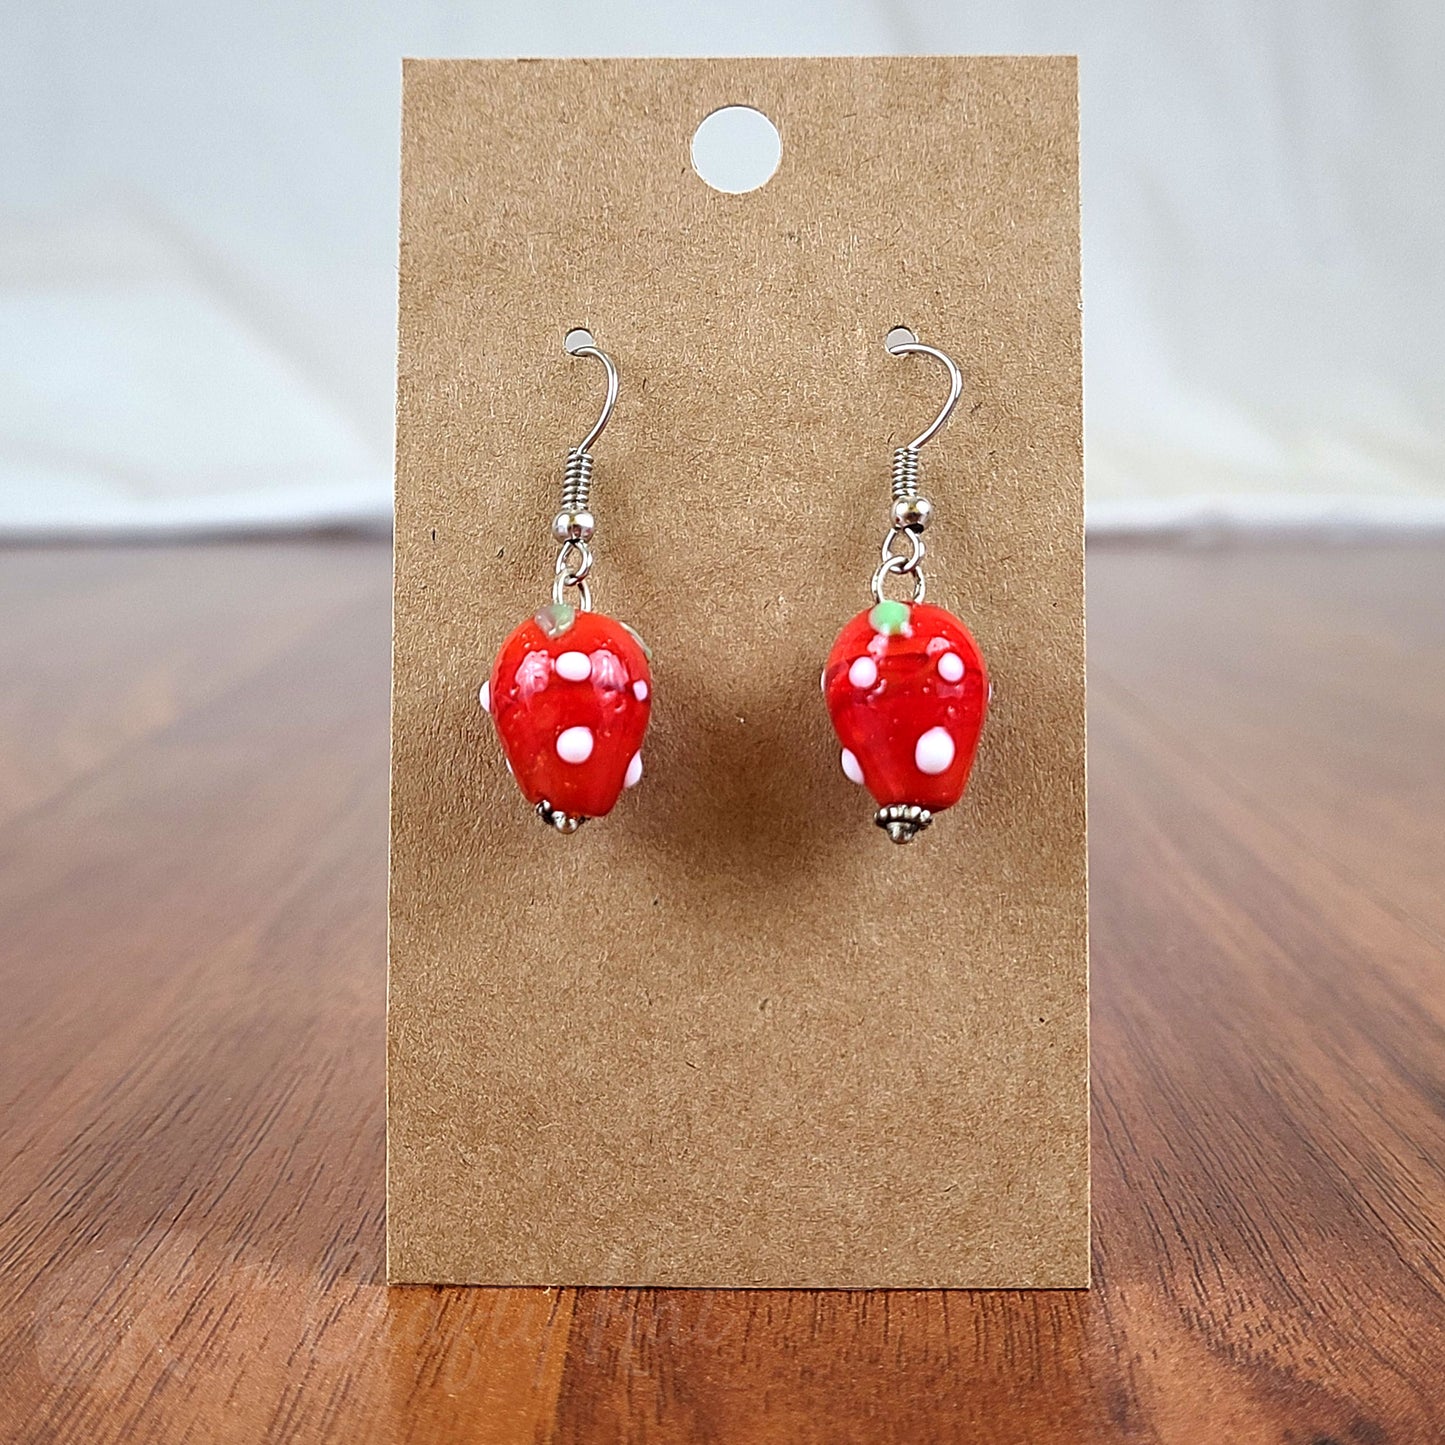 Simple drop earrings made of lampwork glass shaped like strawberries and silver-plated fittings